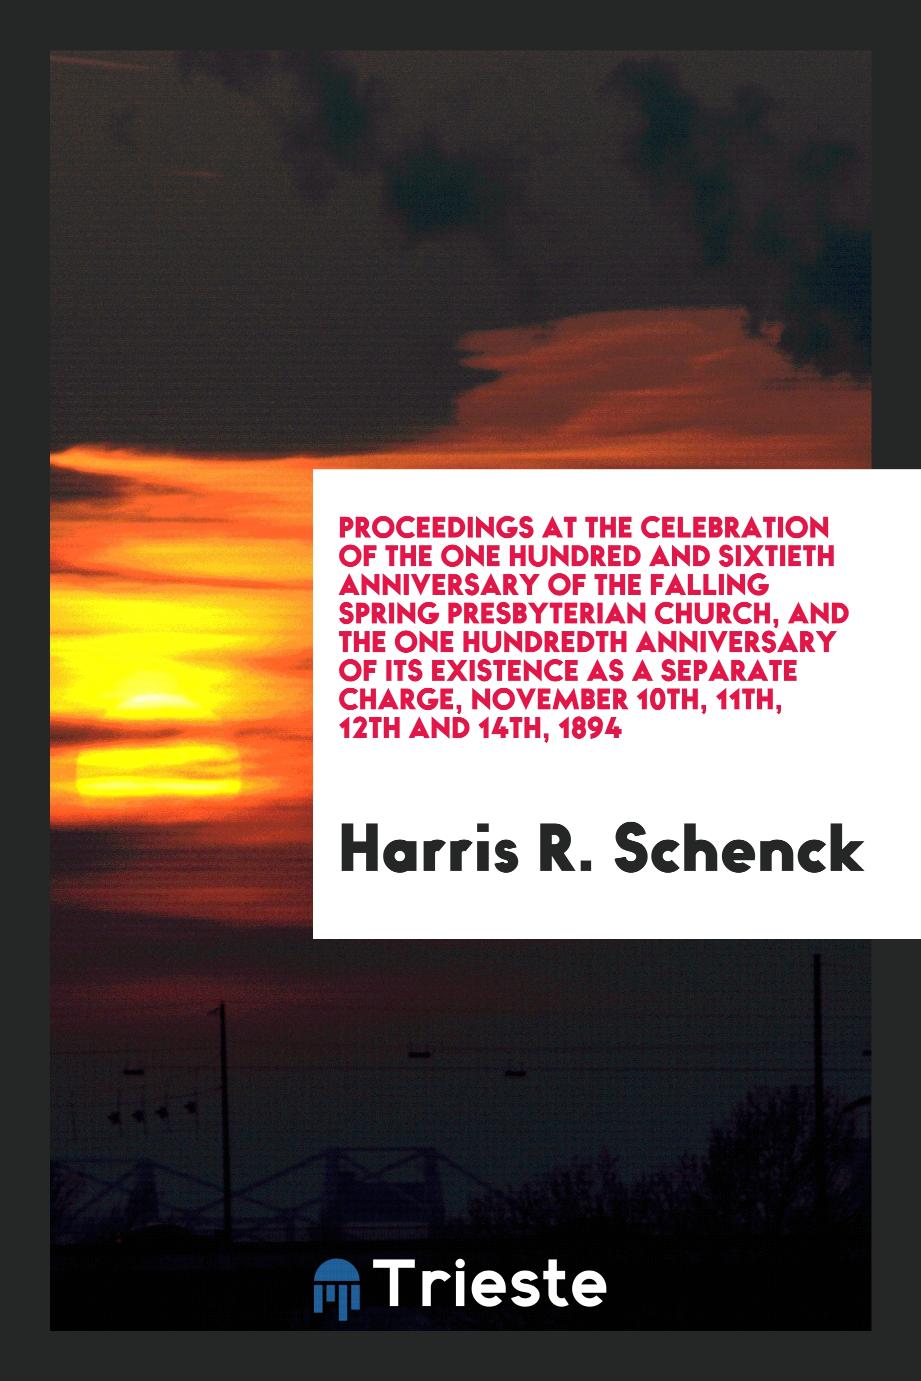 Proceedings at the celebration of the one hundred and sixtieth anniversary of the Falling Spring Presbyterian Church, and the one hundredth anniversary of its existence as a separate charge, November 10th, 11th, 12th and 14th, 1894